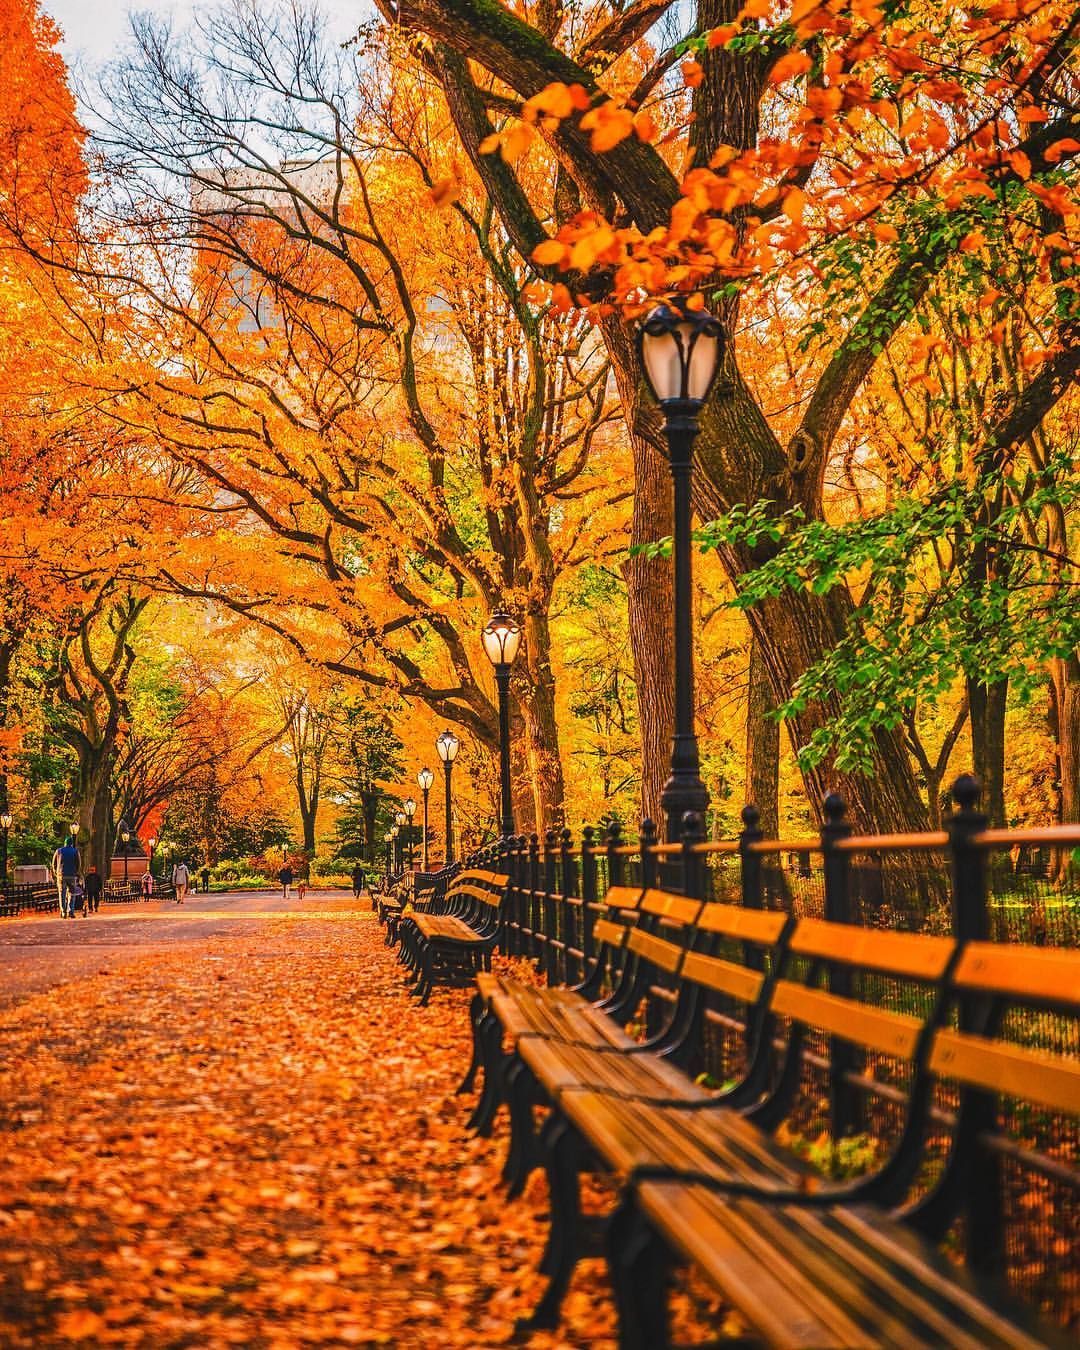 Central Park NYC. Autumn in new york, Central park nyc, Autumn scenery